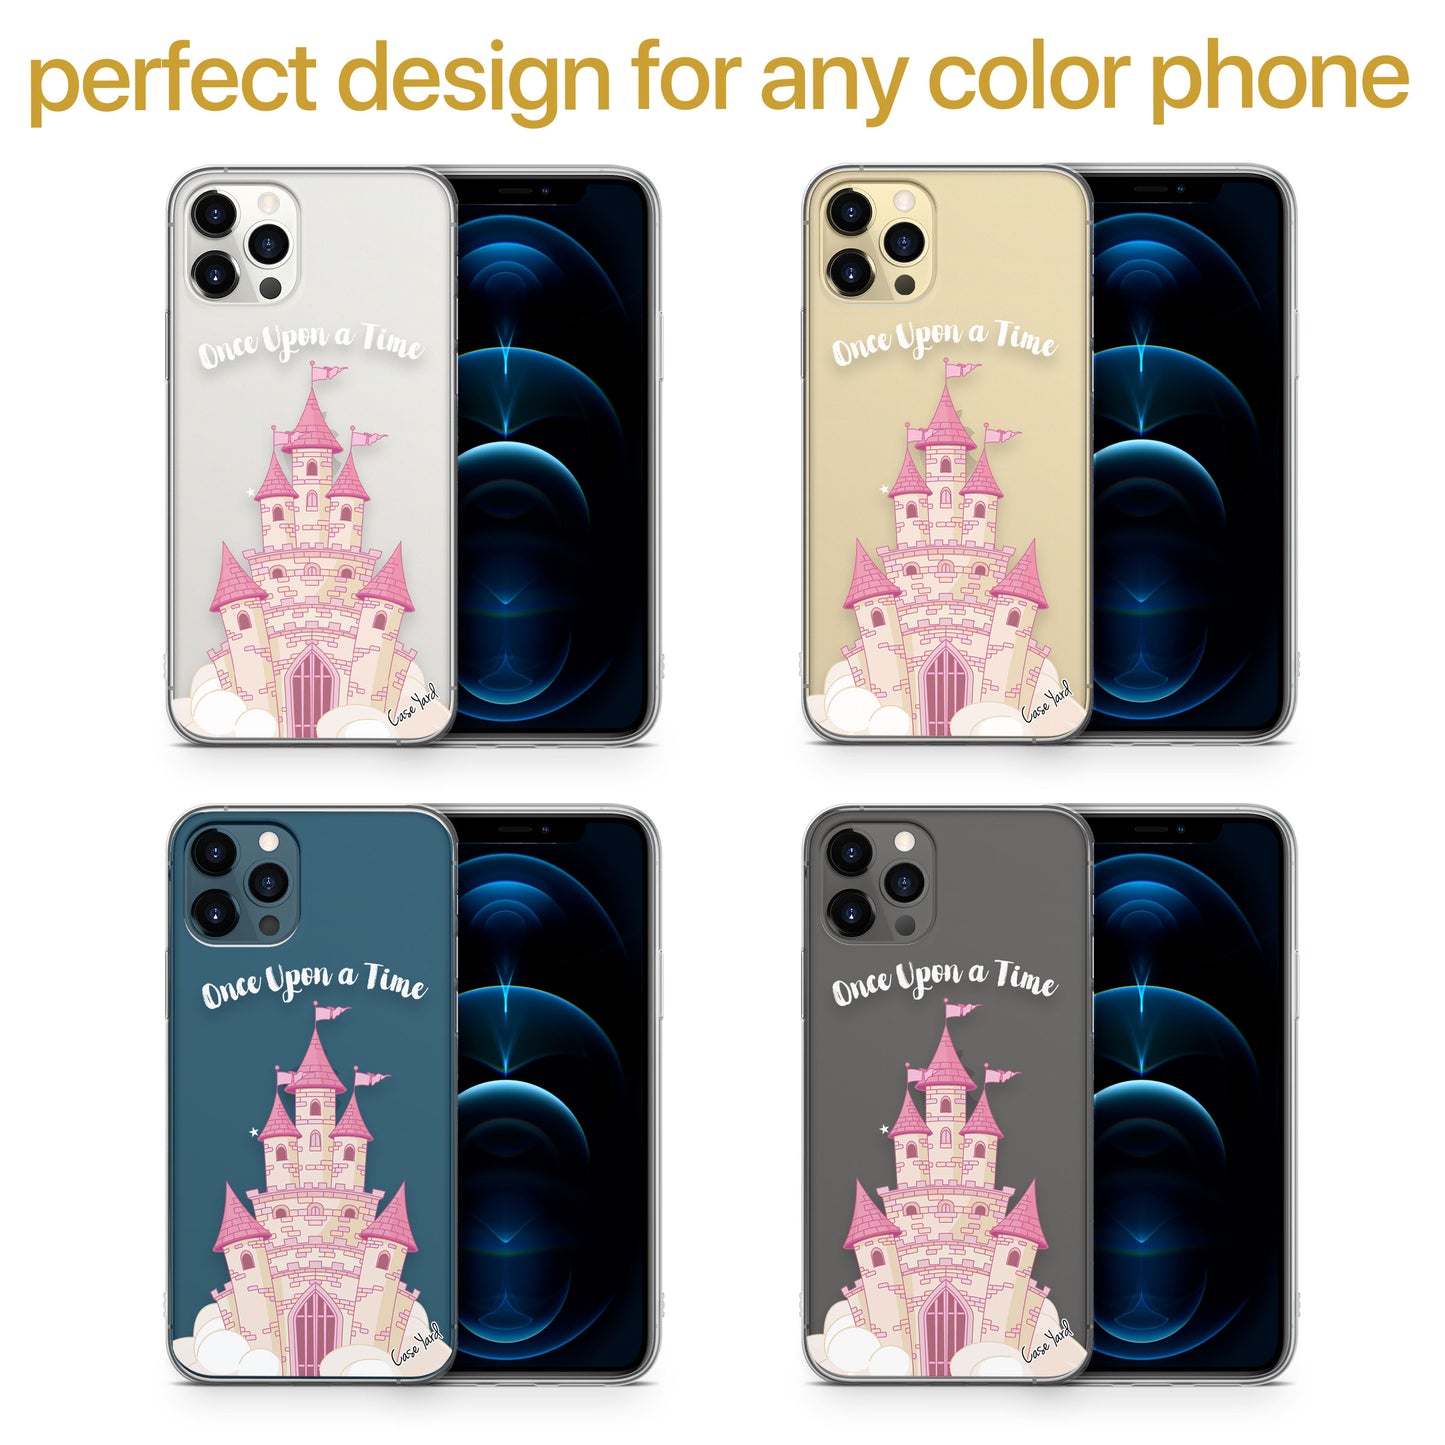 TPU Clear case with (Once Upon a Time) Design for iPhone & Samsung Phones